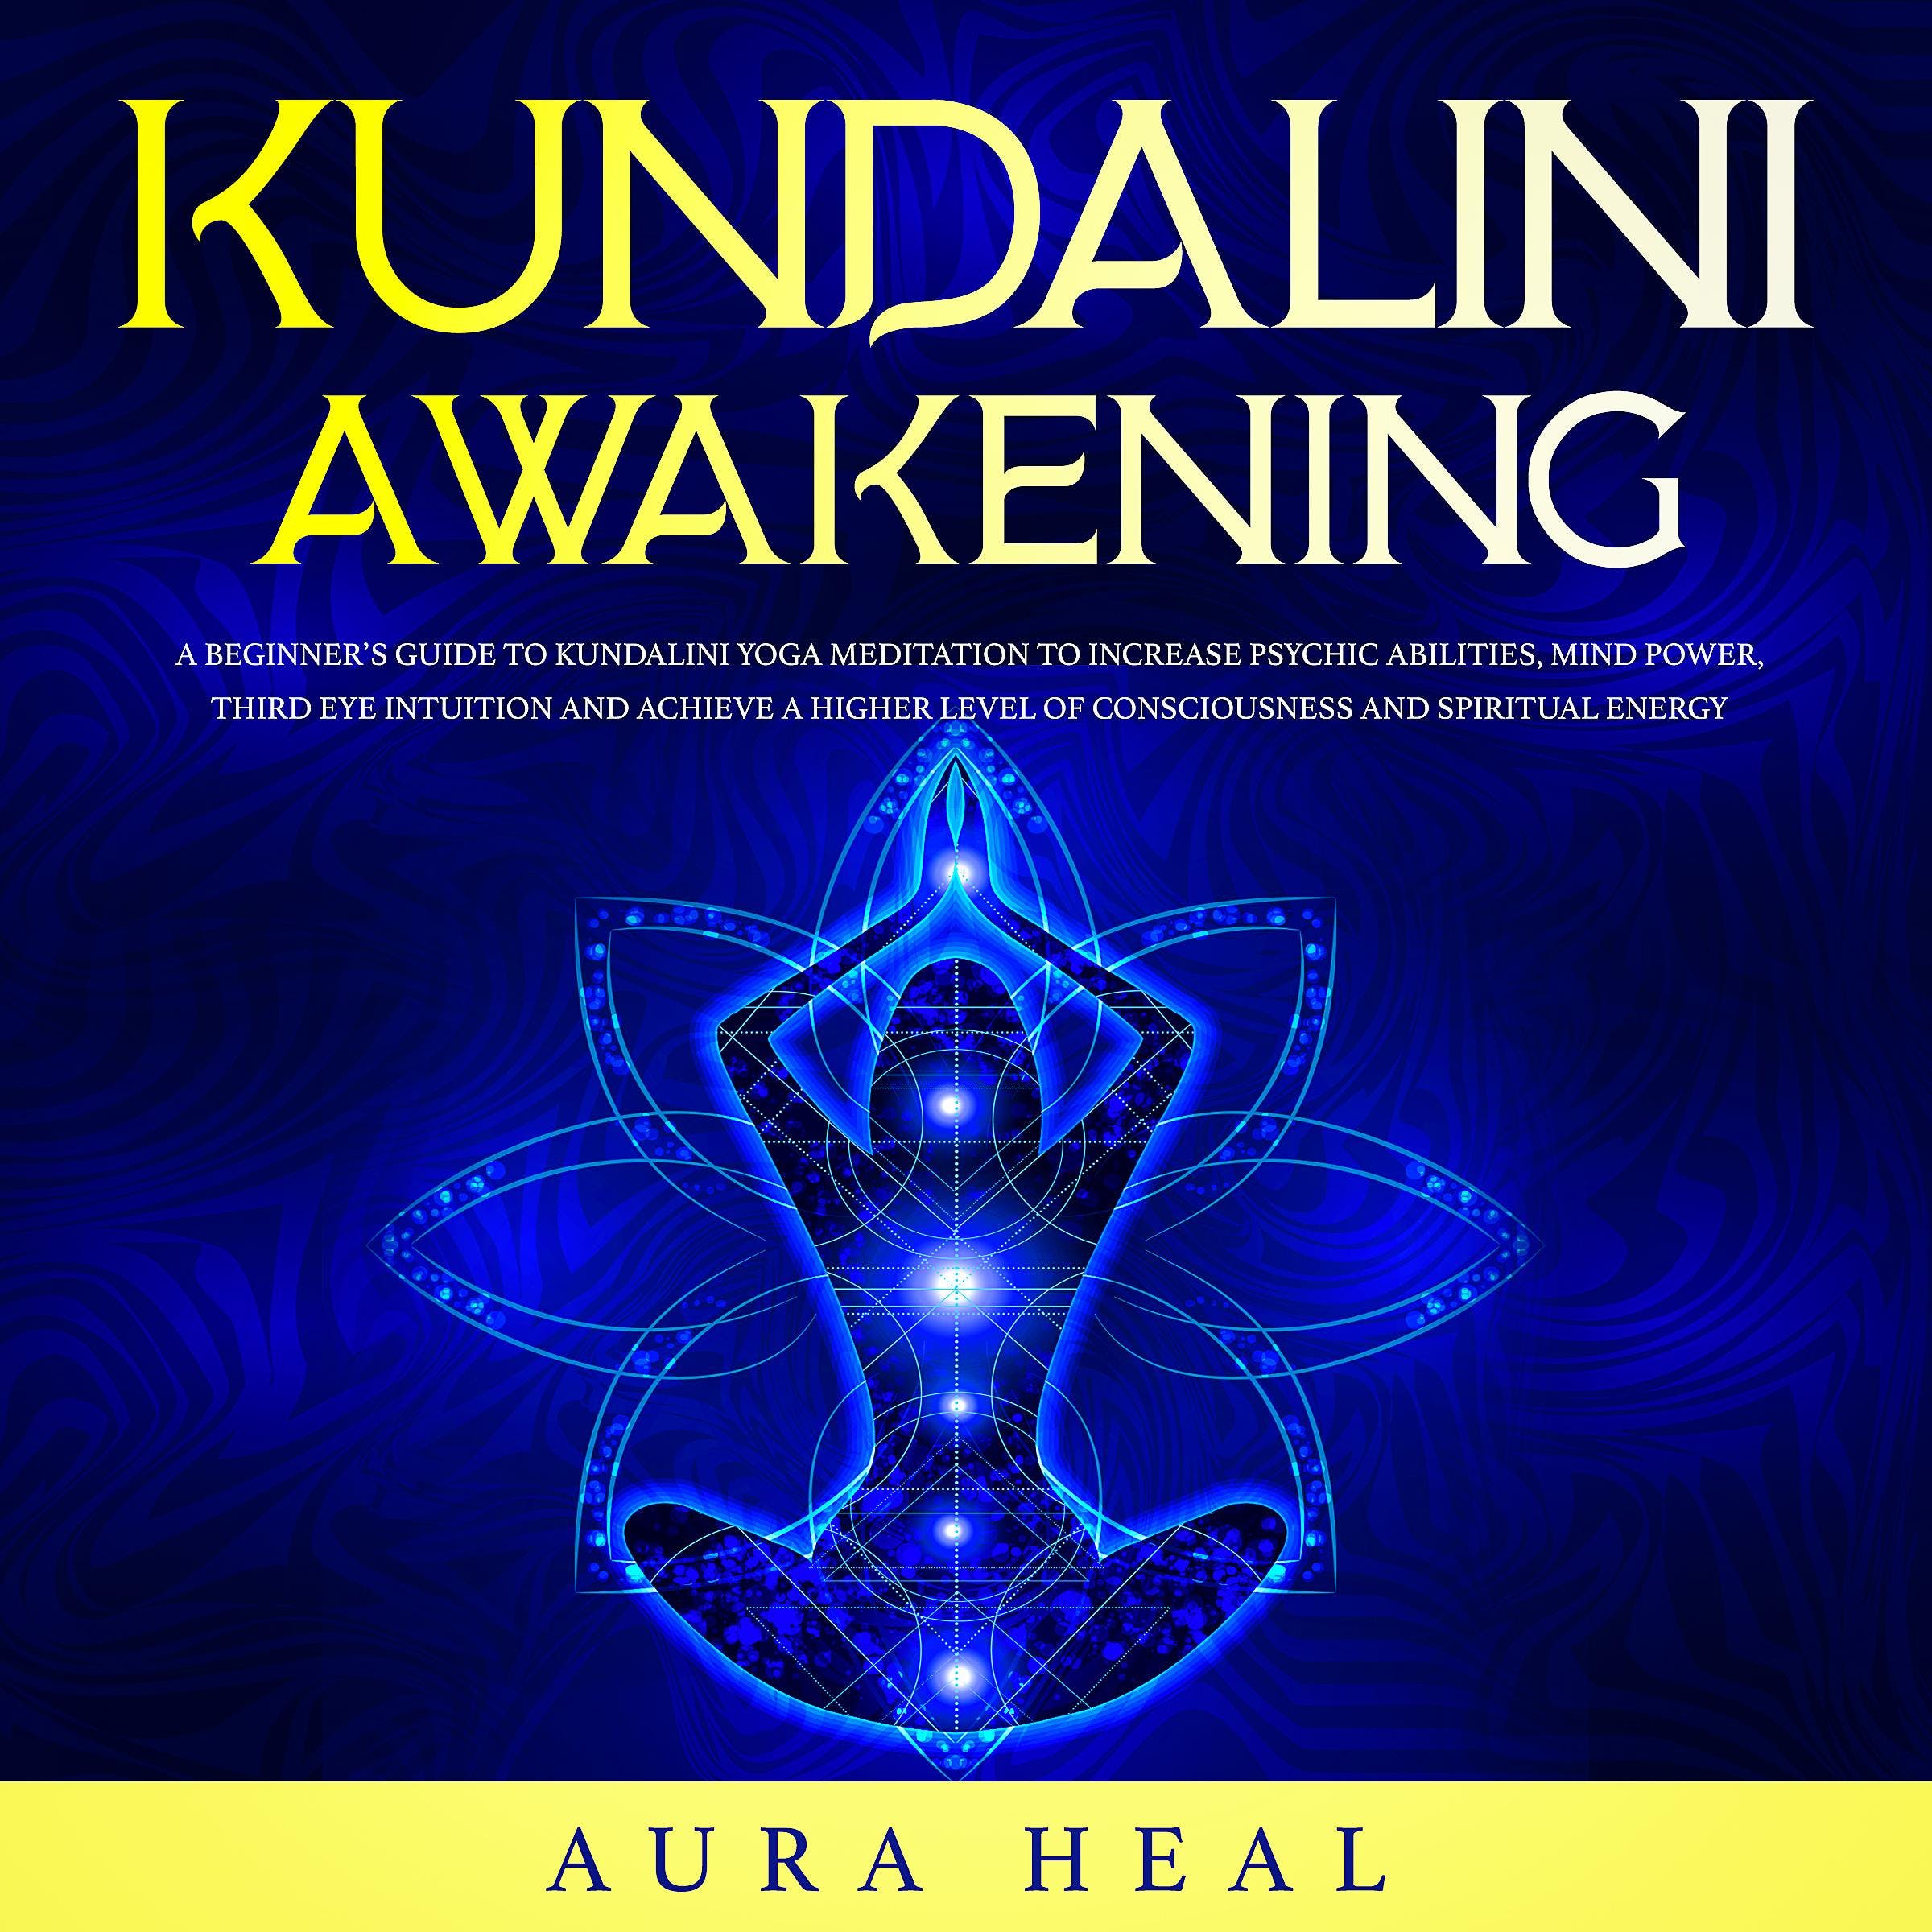 Kundalini Awakening: A Beginner's Guide To Kundalini Yoga Meditation To  Increase Psychic Abilities, Mind Power, Third Eye Intuition And Achieve A  Higher Level Of Consciousness And Spiritual Energy, Audiobook